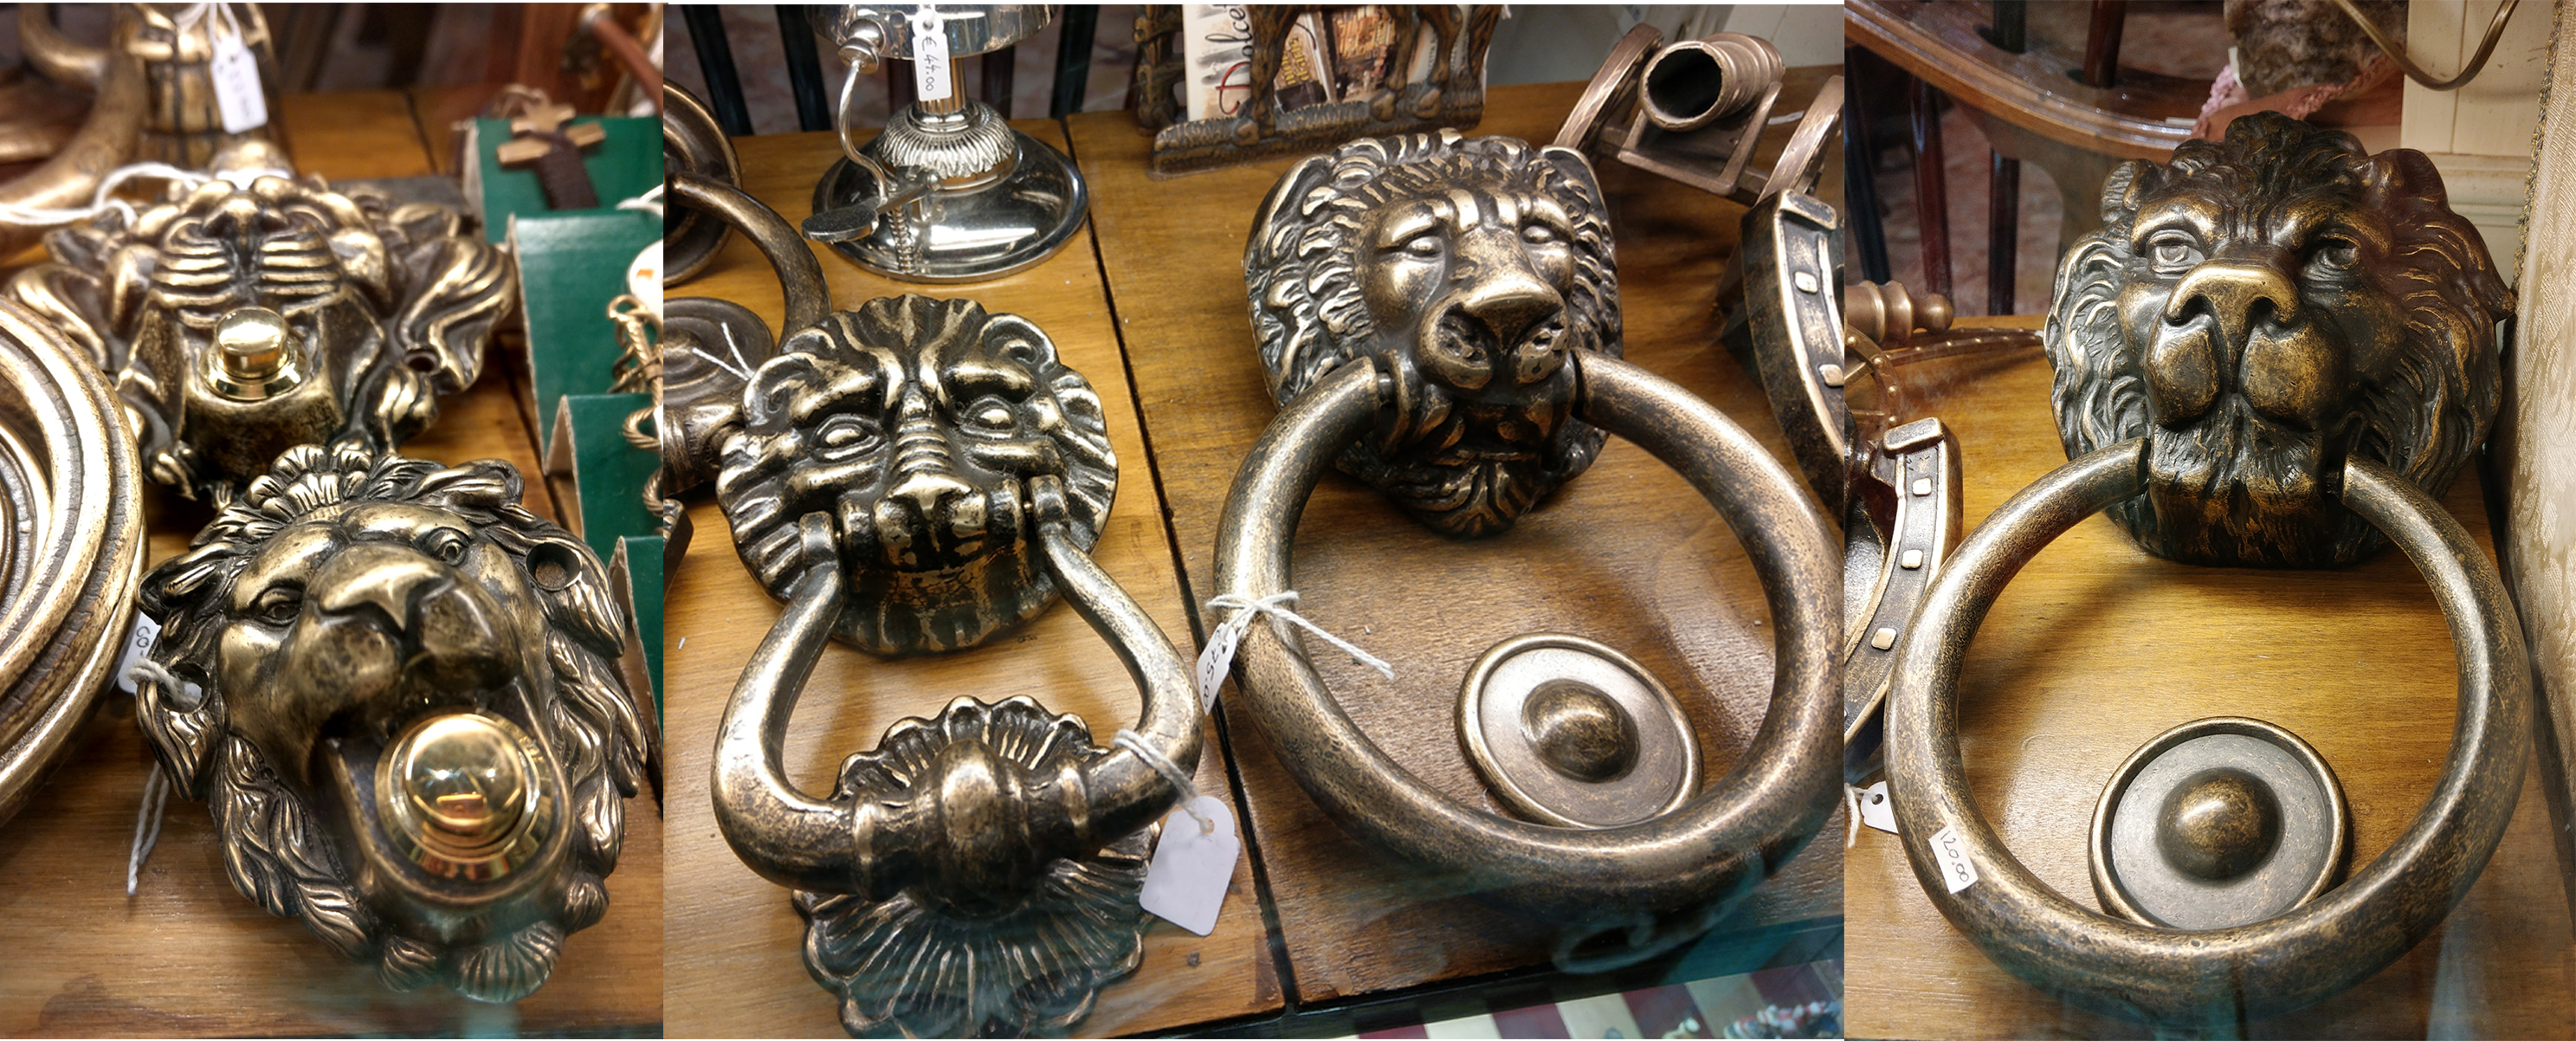 Bronze lion bells and door handles were found in a local shop which sold traditional Venetian ornaments.